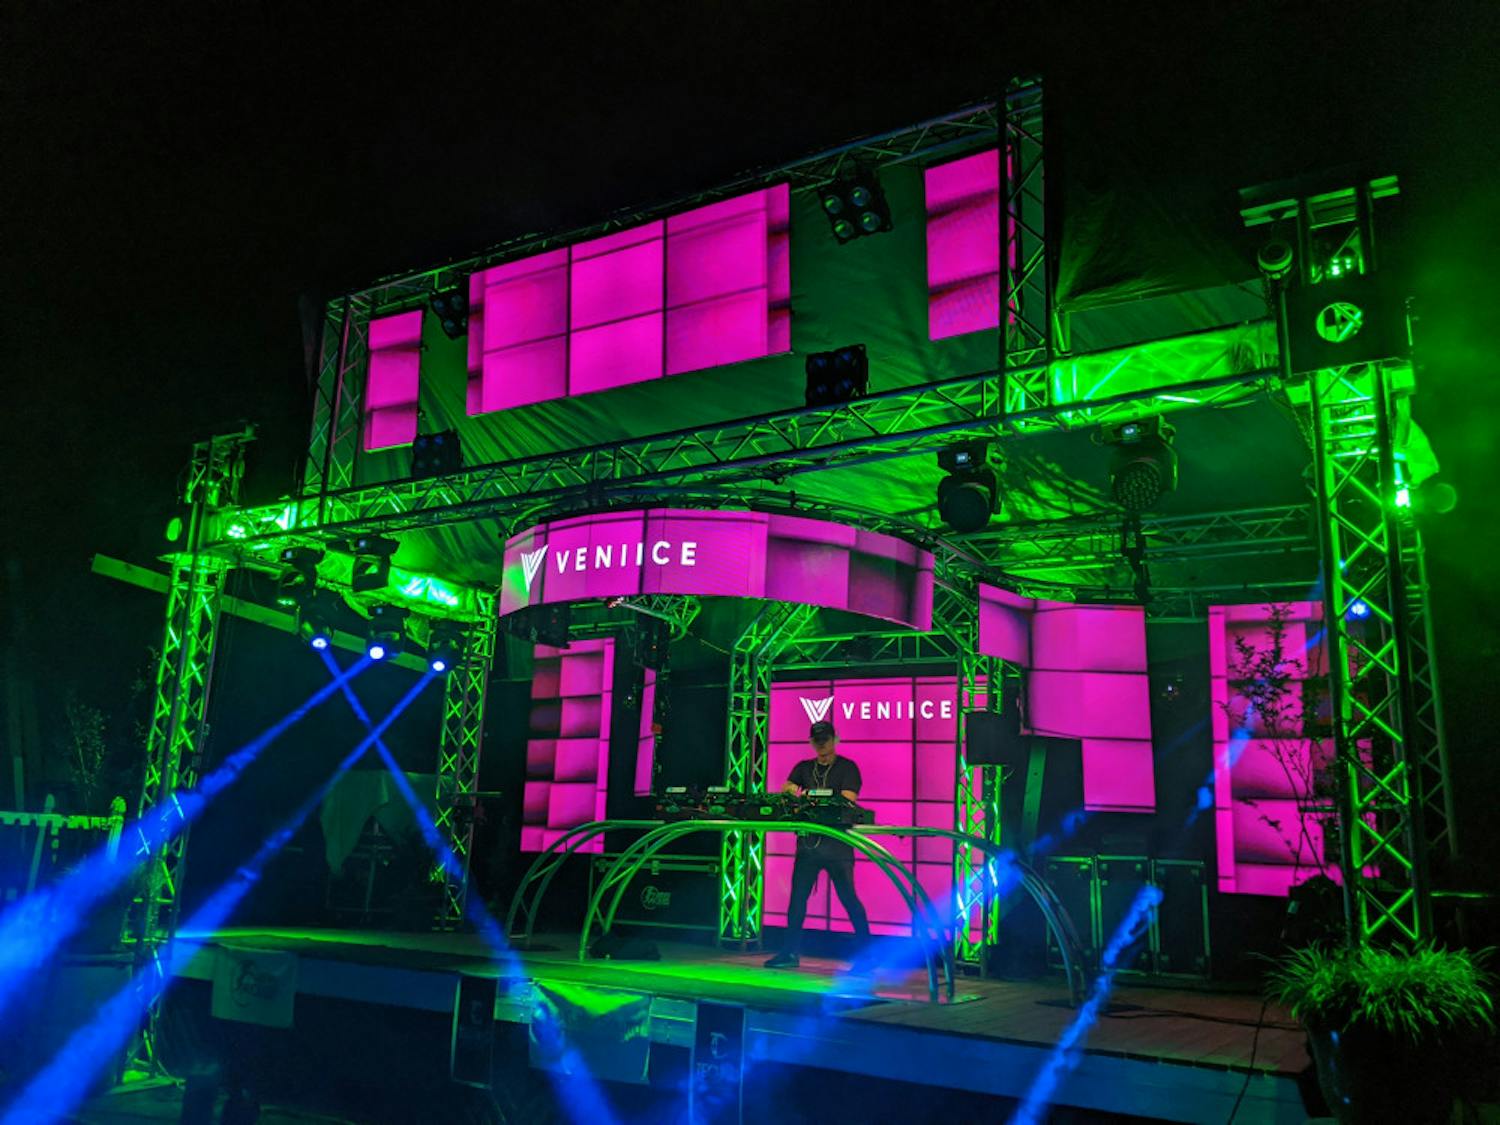 Palmieri, 34-year-old Gainesville resident and owner of Gator Sound and Lighting has built a fully functioning stage, complete with lasers and lights, in his backyard.